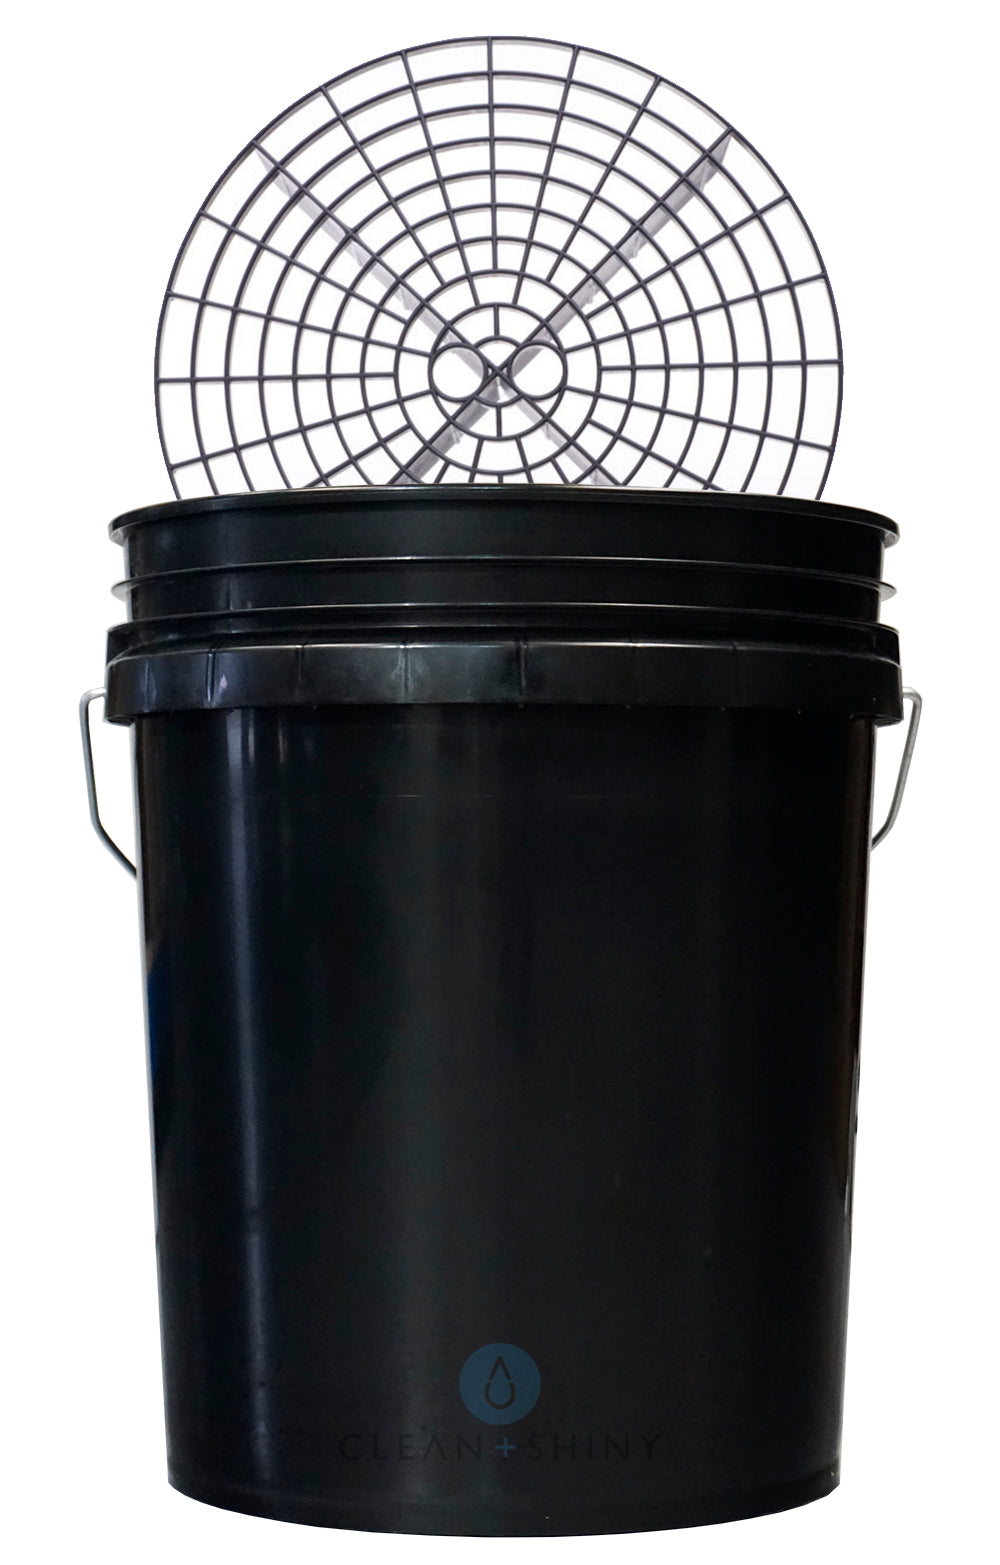 Clean and Shiny US 5 Gallon Bucket and Grit Guard Kit (Various Colours)